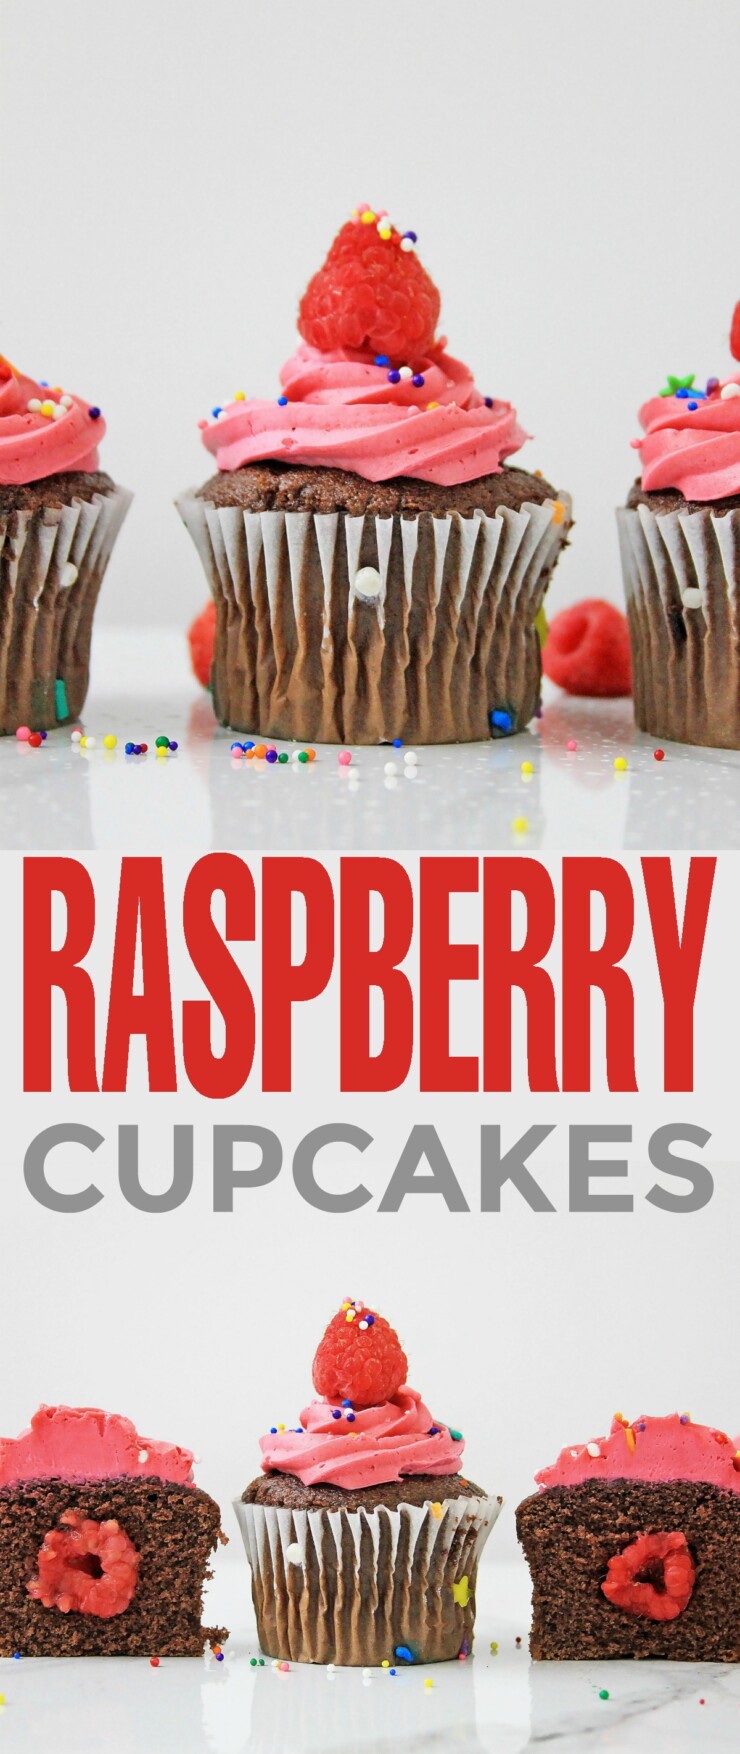 These raspberry cupcakes will take you back to summer time - they're so good, easy to make, and a real treat everyone is sure to love with a juicy, unexpected surprise inside. 